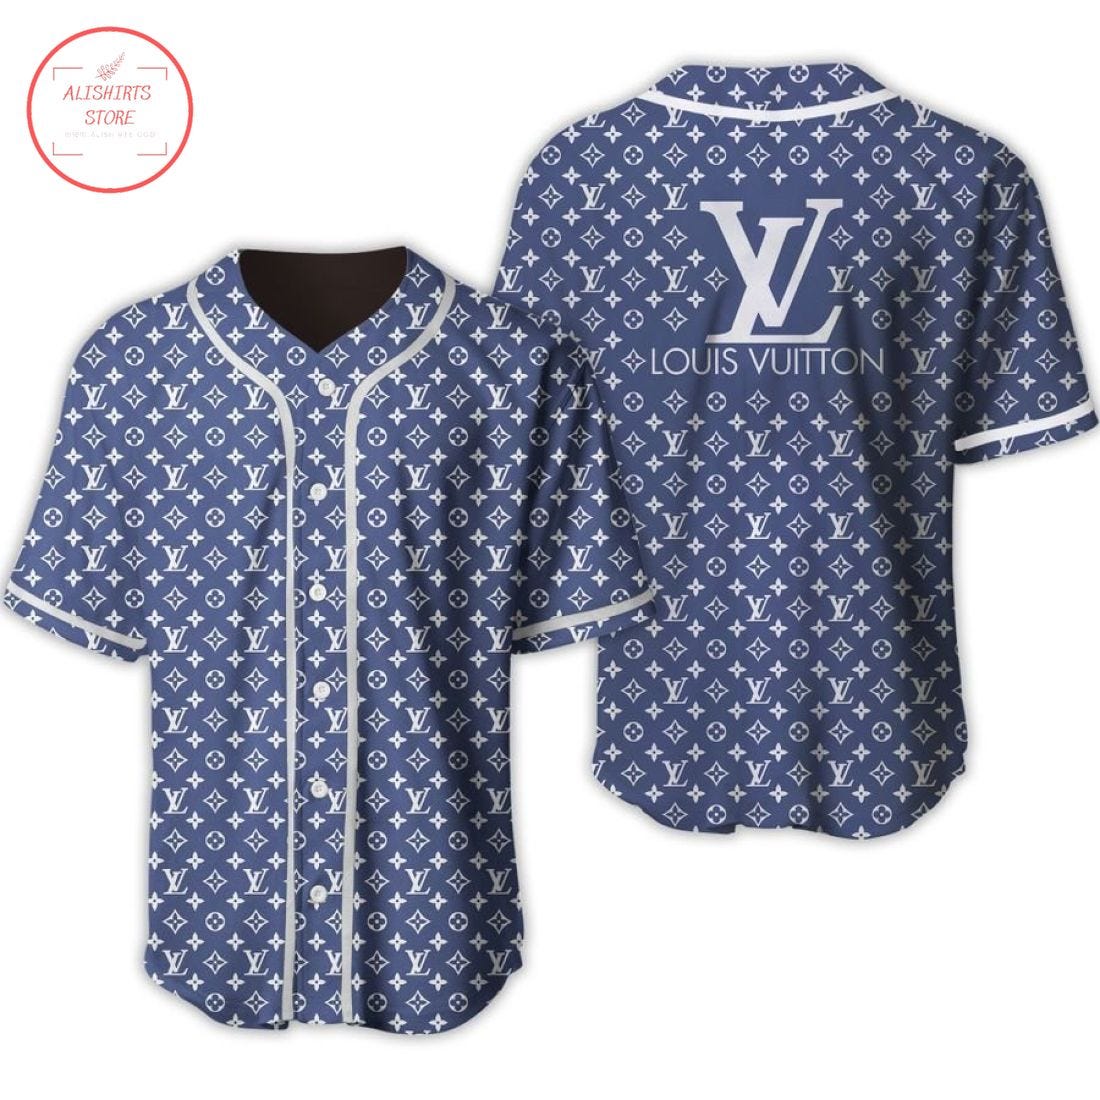 LOUIS VUITTON LUXURY BRAND BASEBALL JERSEY, by responsible level